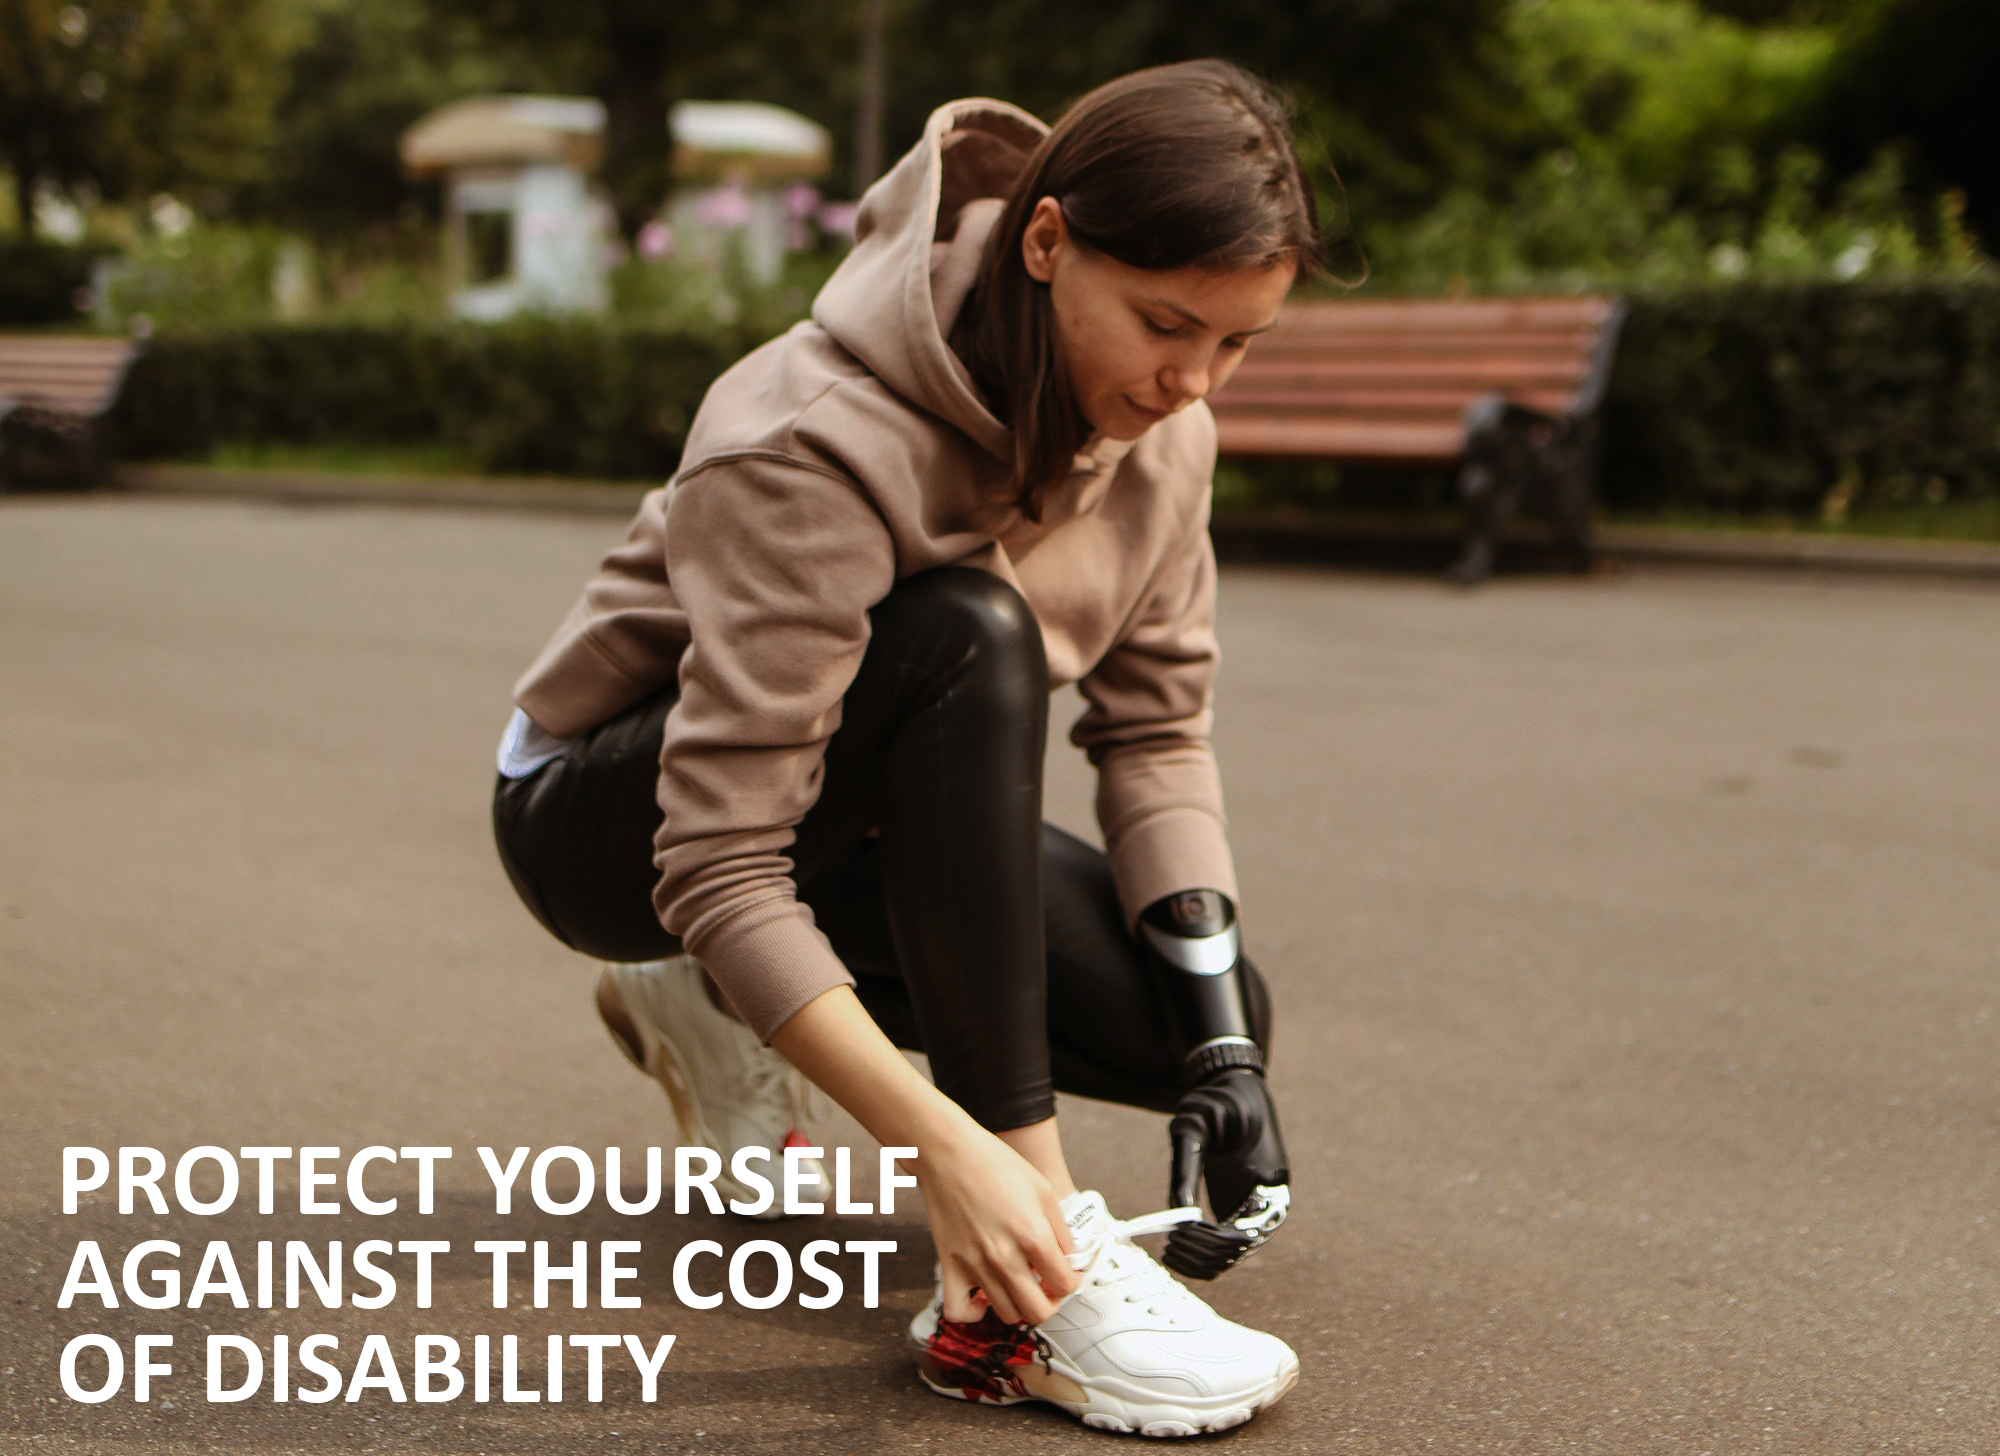 Protect yourself against the cost of disability